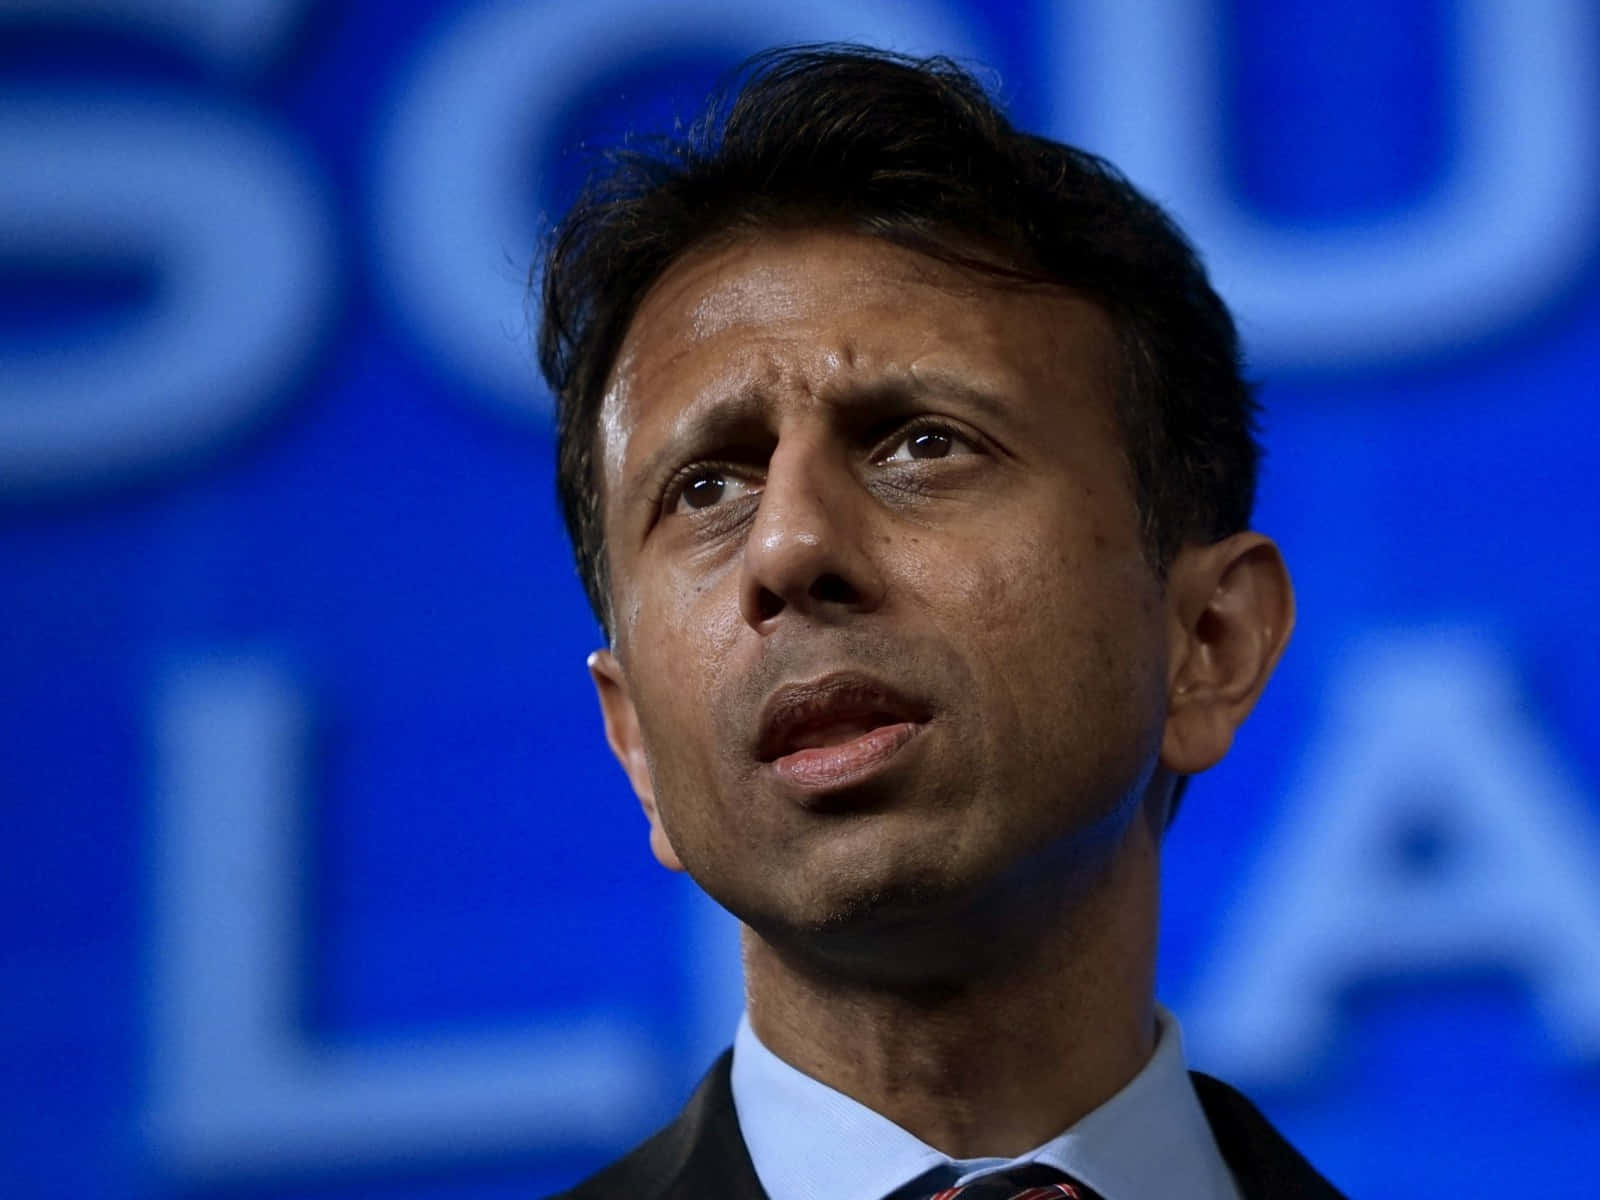 Caption: Bobby Jindal in a professional portrait session Wallpaper